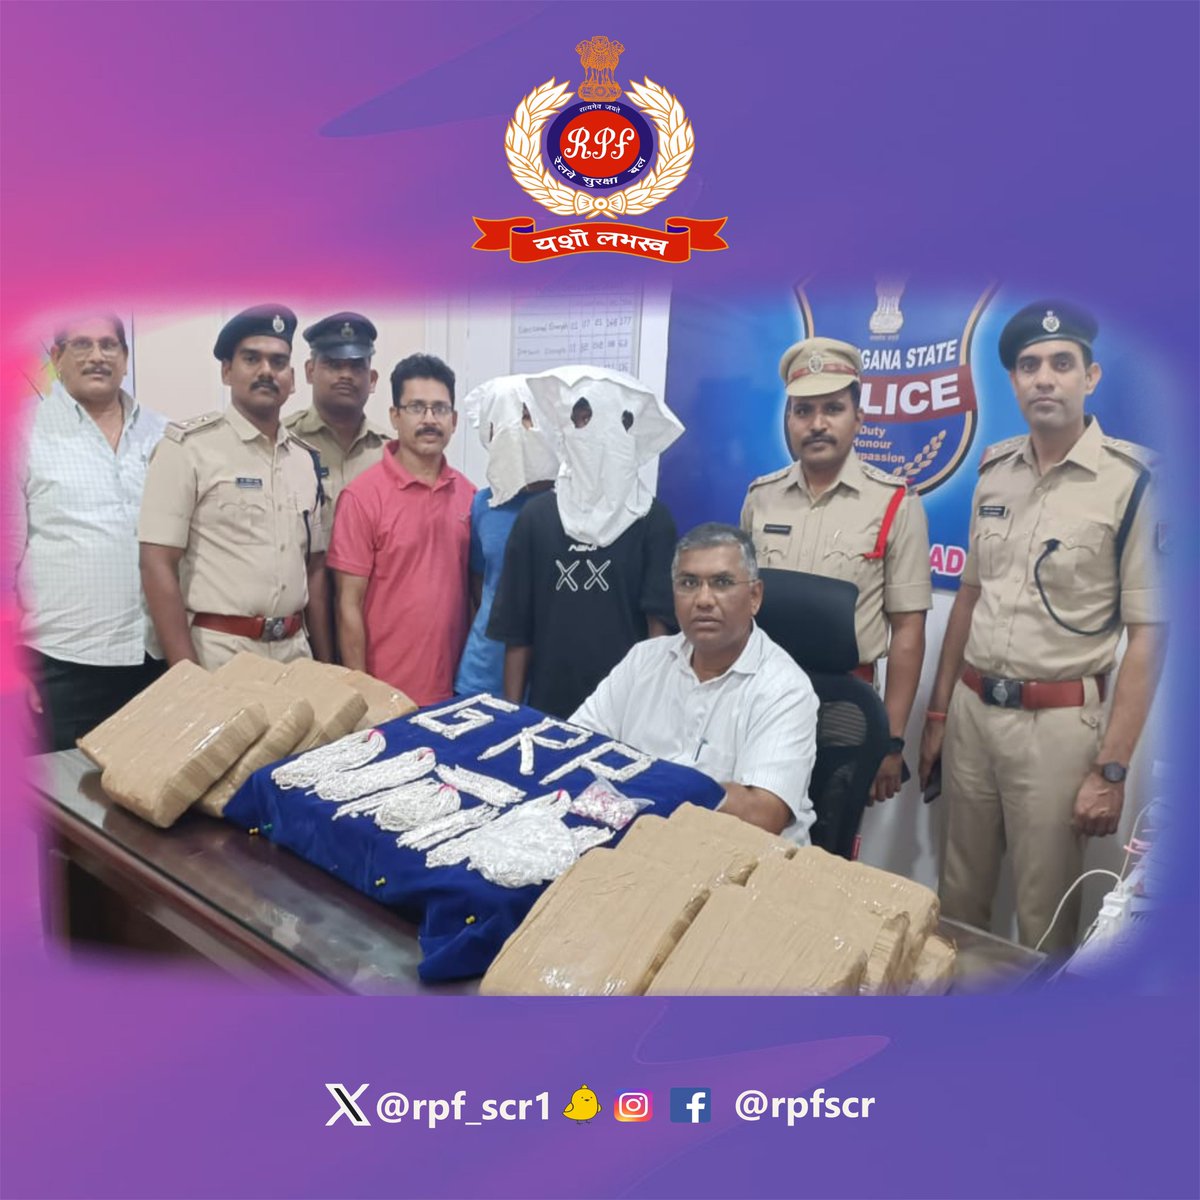 Securing Our Society: Ensuring Safety Every Step of the Way! #RPF & #GRP unite to bust 2 Drug Peddlers with 34 kgs of Dry Ganja, plus recovery of 5.5 kgs of Silver Ornaments from another perpetrator operating without valid documents. #OperationNARCOS #OperationSatark @RPF_INDIA